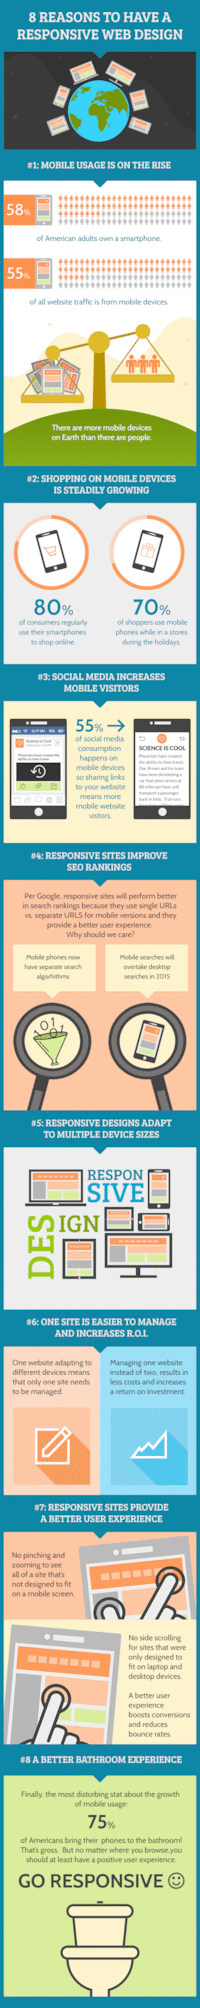 8 Reasons to Have a Responsive Web Design (Infographic)